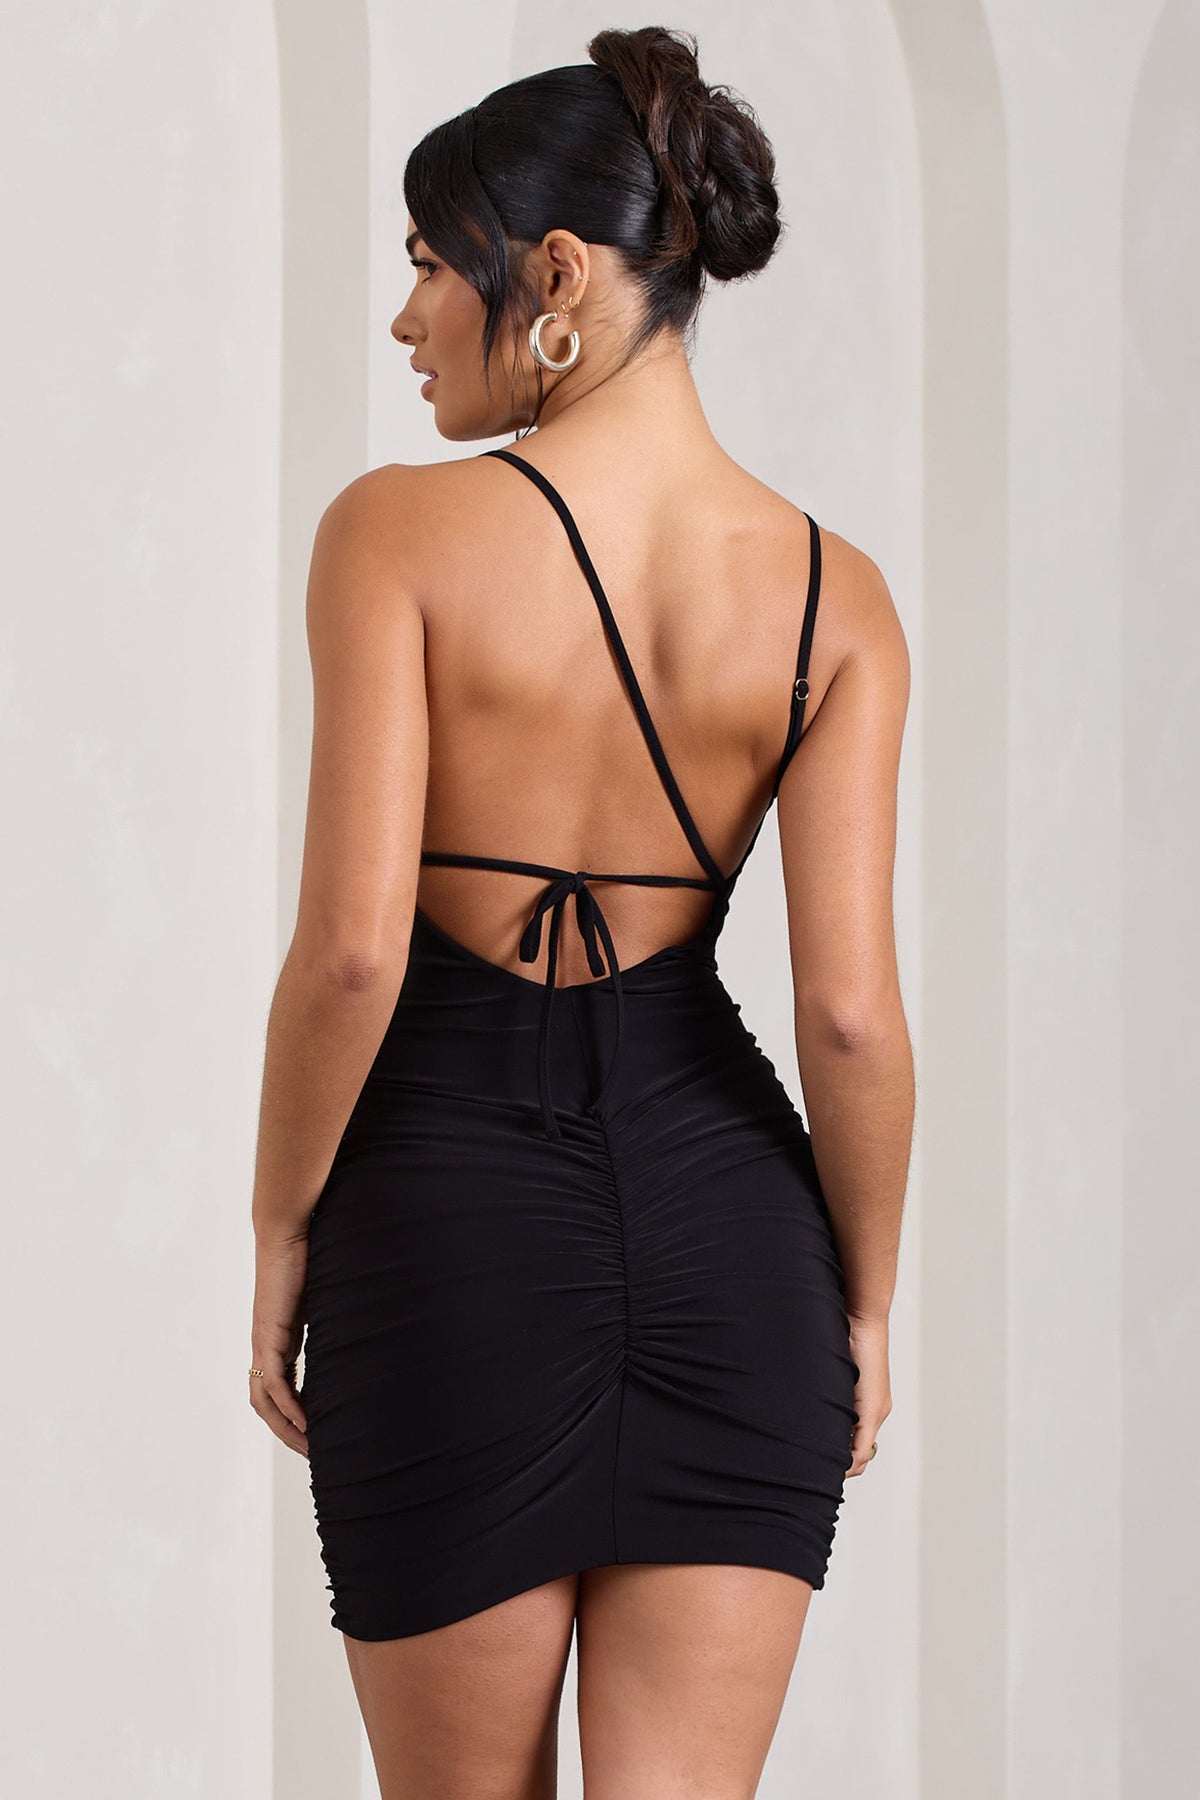 Black Ruched Strappy Top